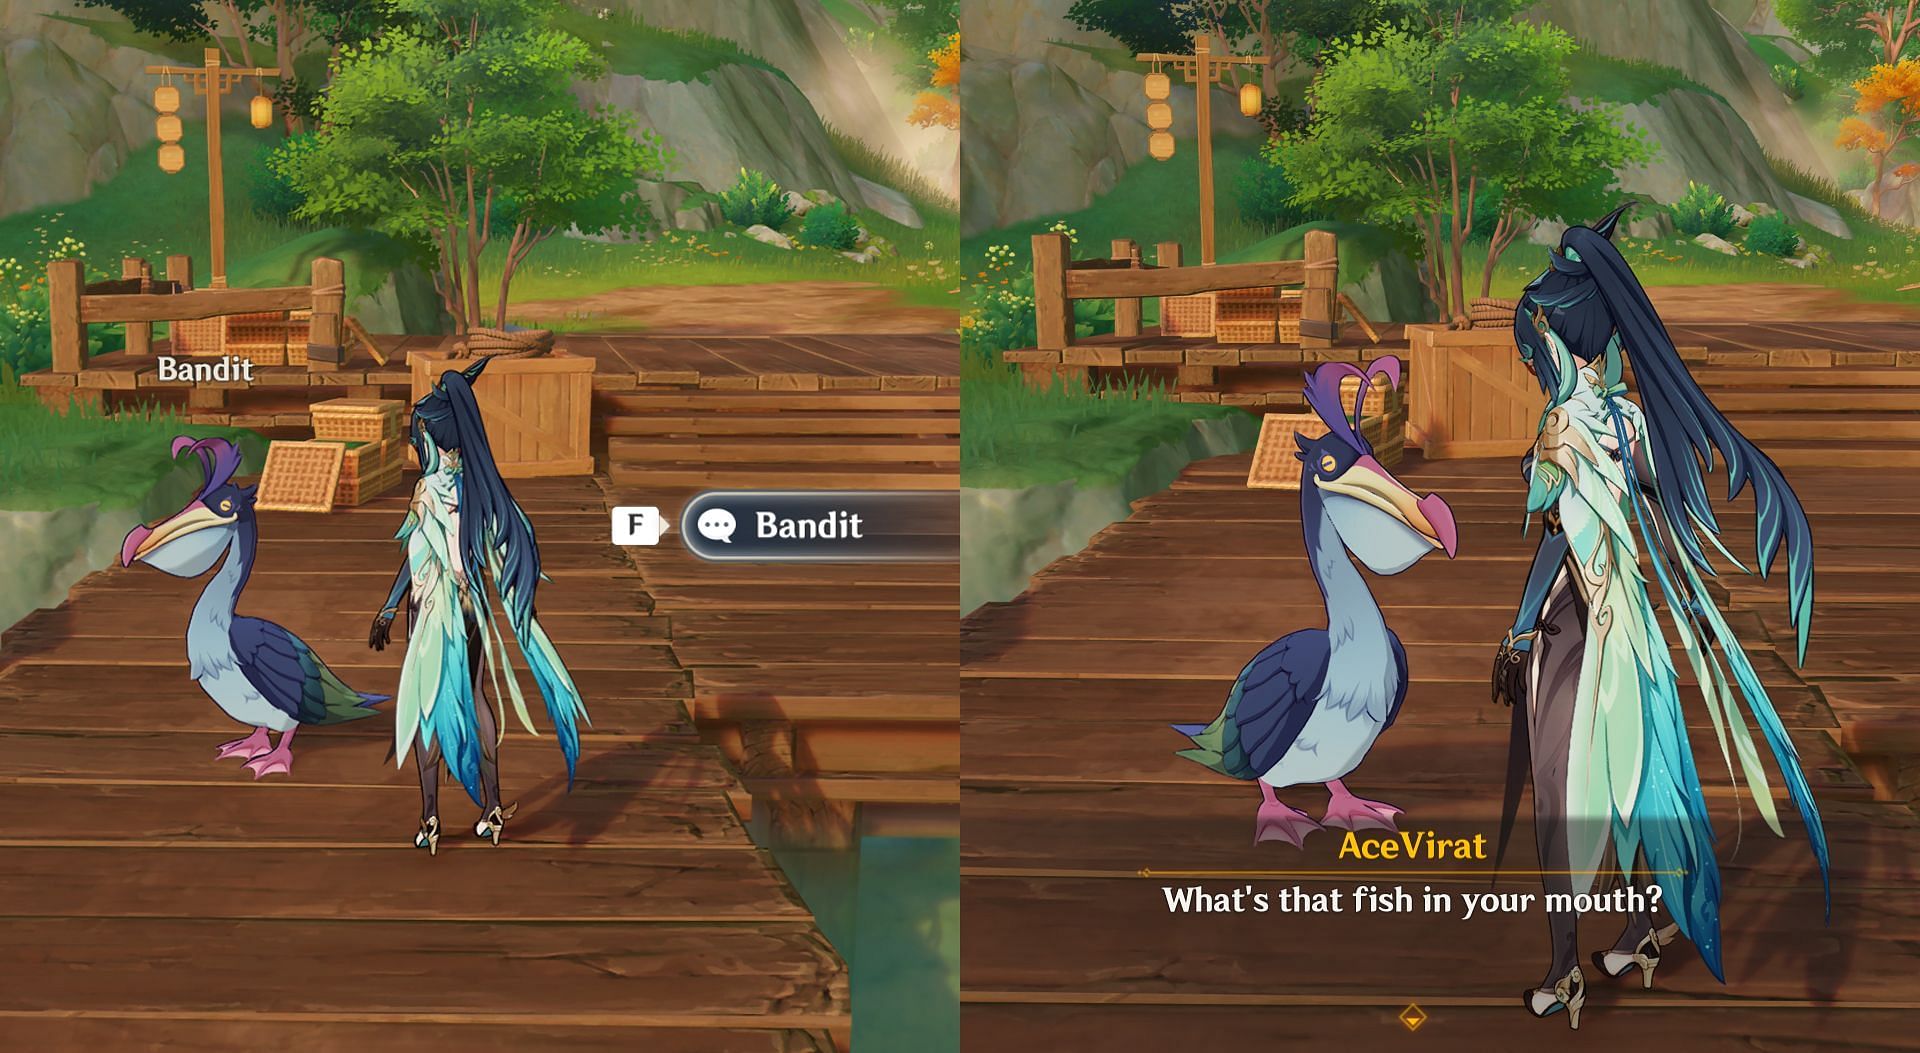 Interact with Bandit to obtain Fish Seized From a Pelican&#039;s Mouth (Image via HoYoverse)